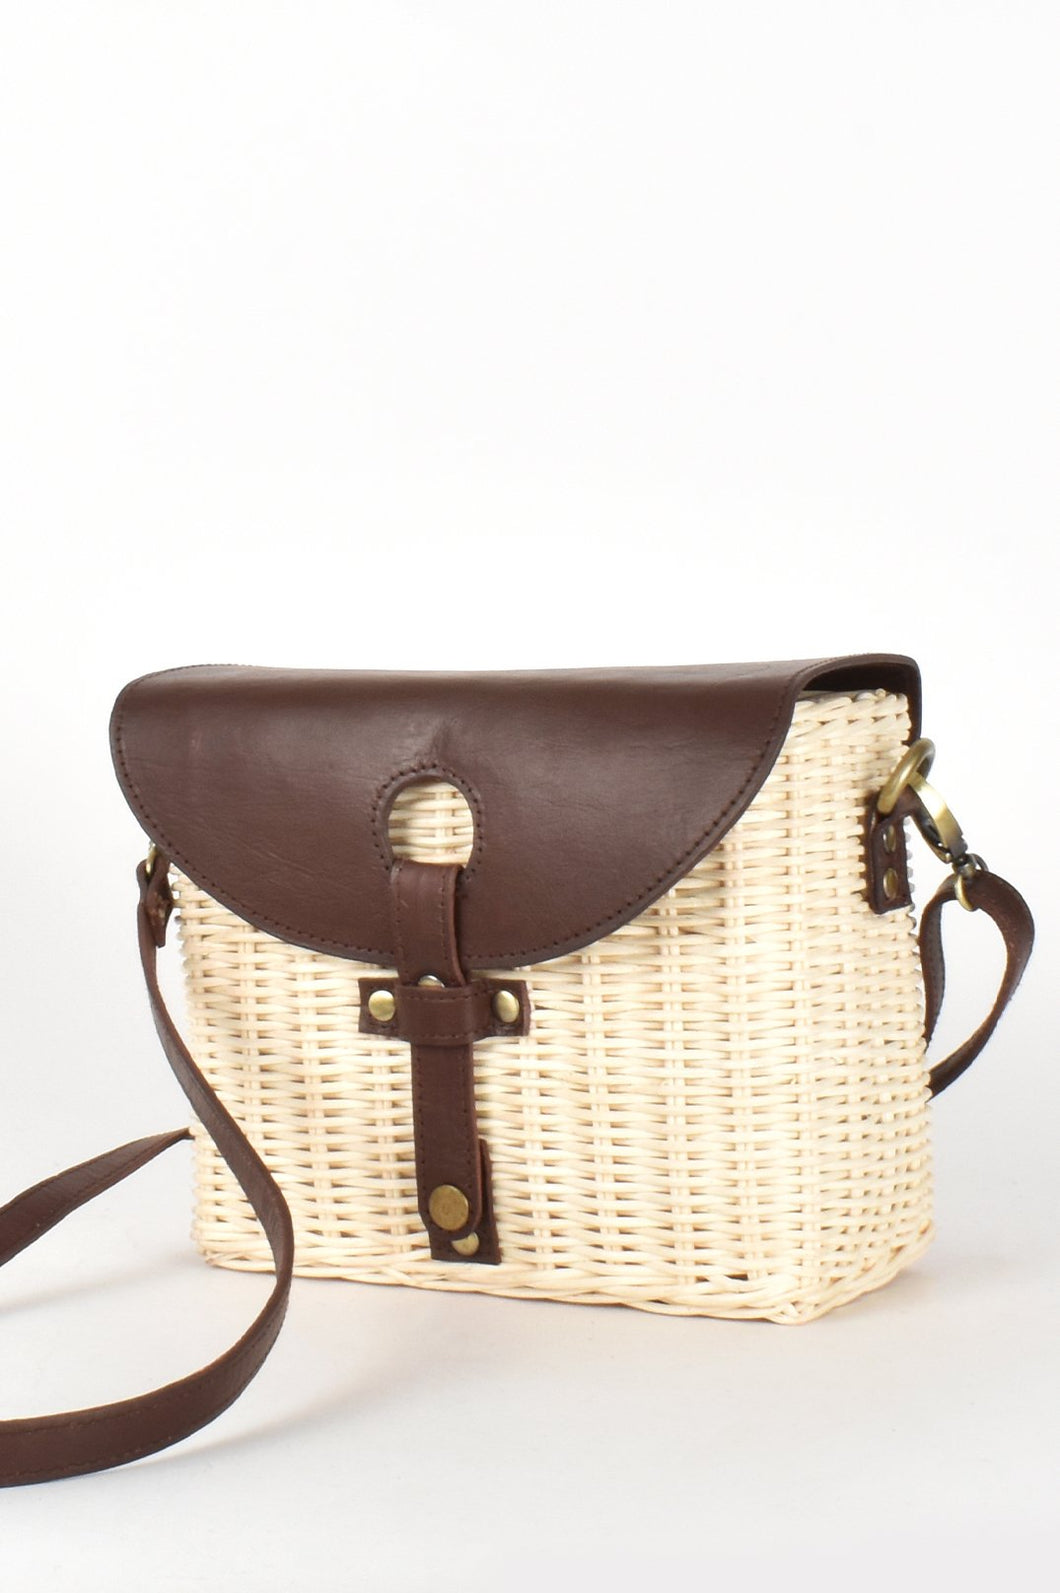 Adorne - Wicker and Leather Flap over Bag